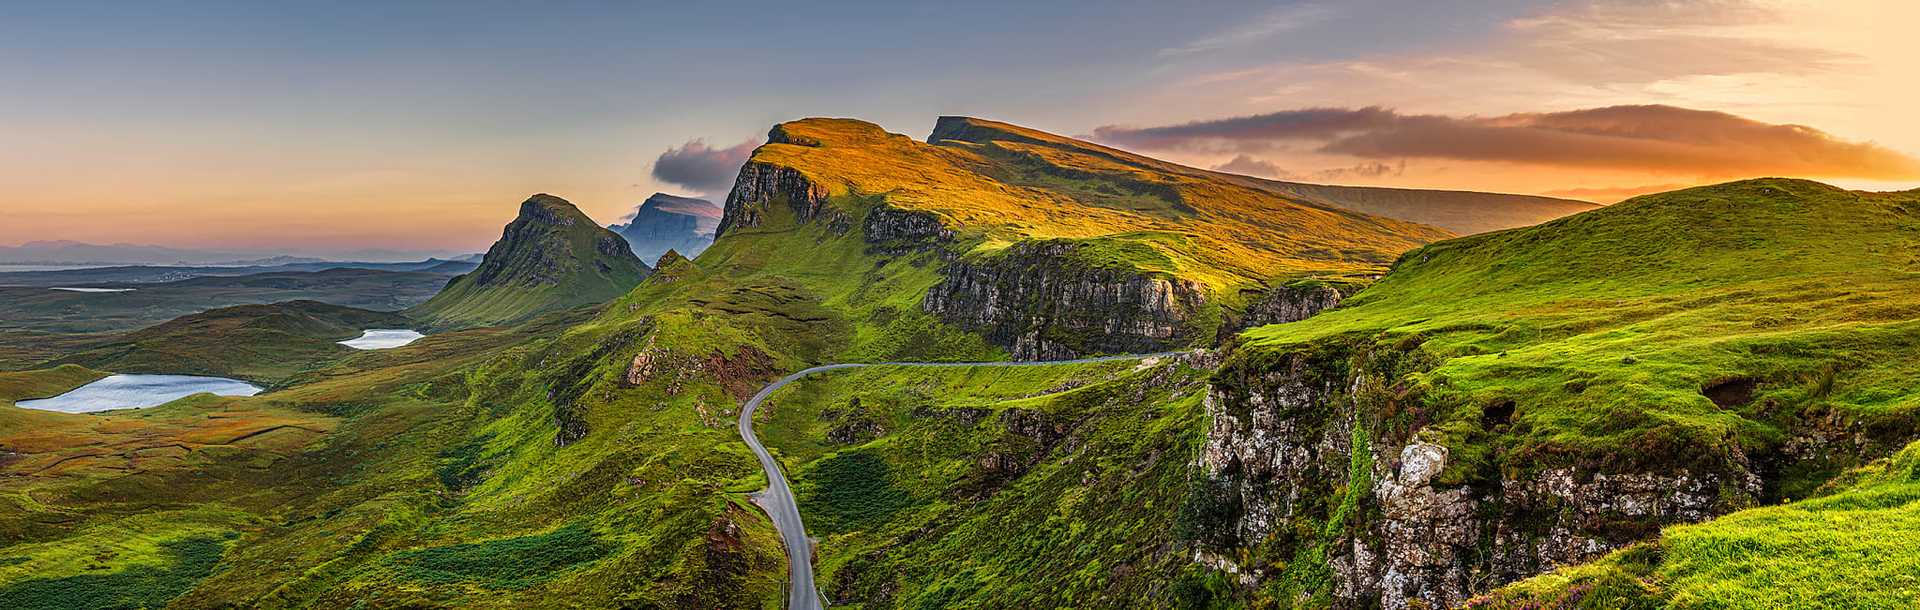 Panorama of the Quiraing mountains at sunset on the Isle of Skye in Scotland.